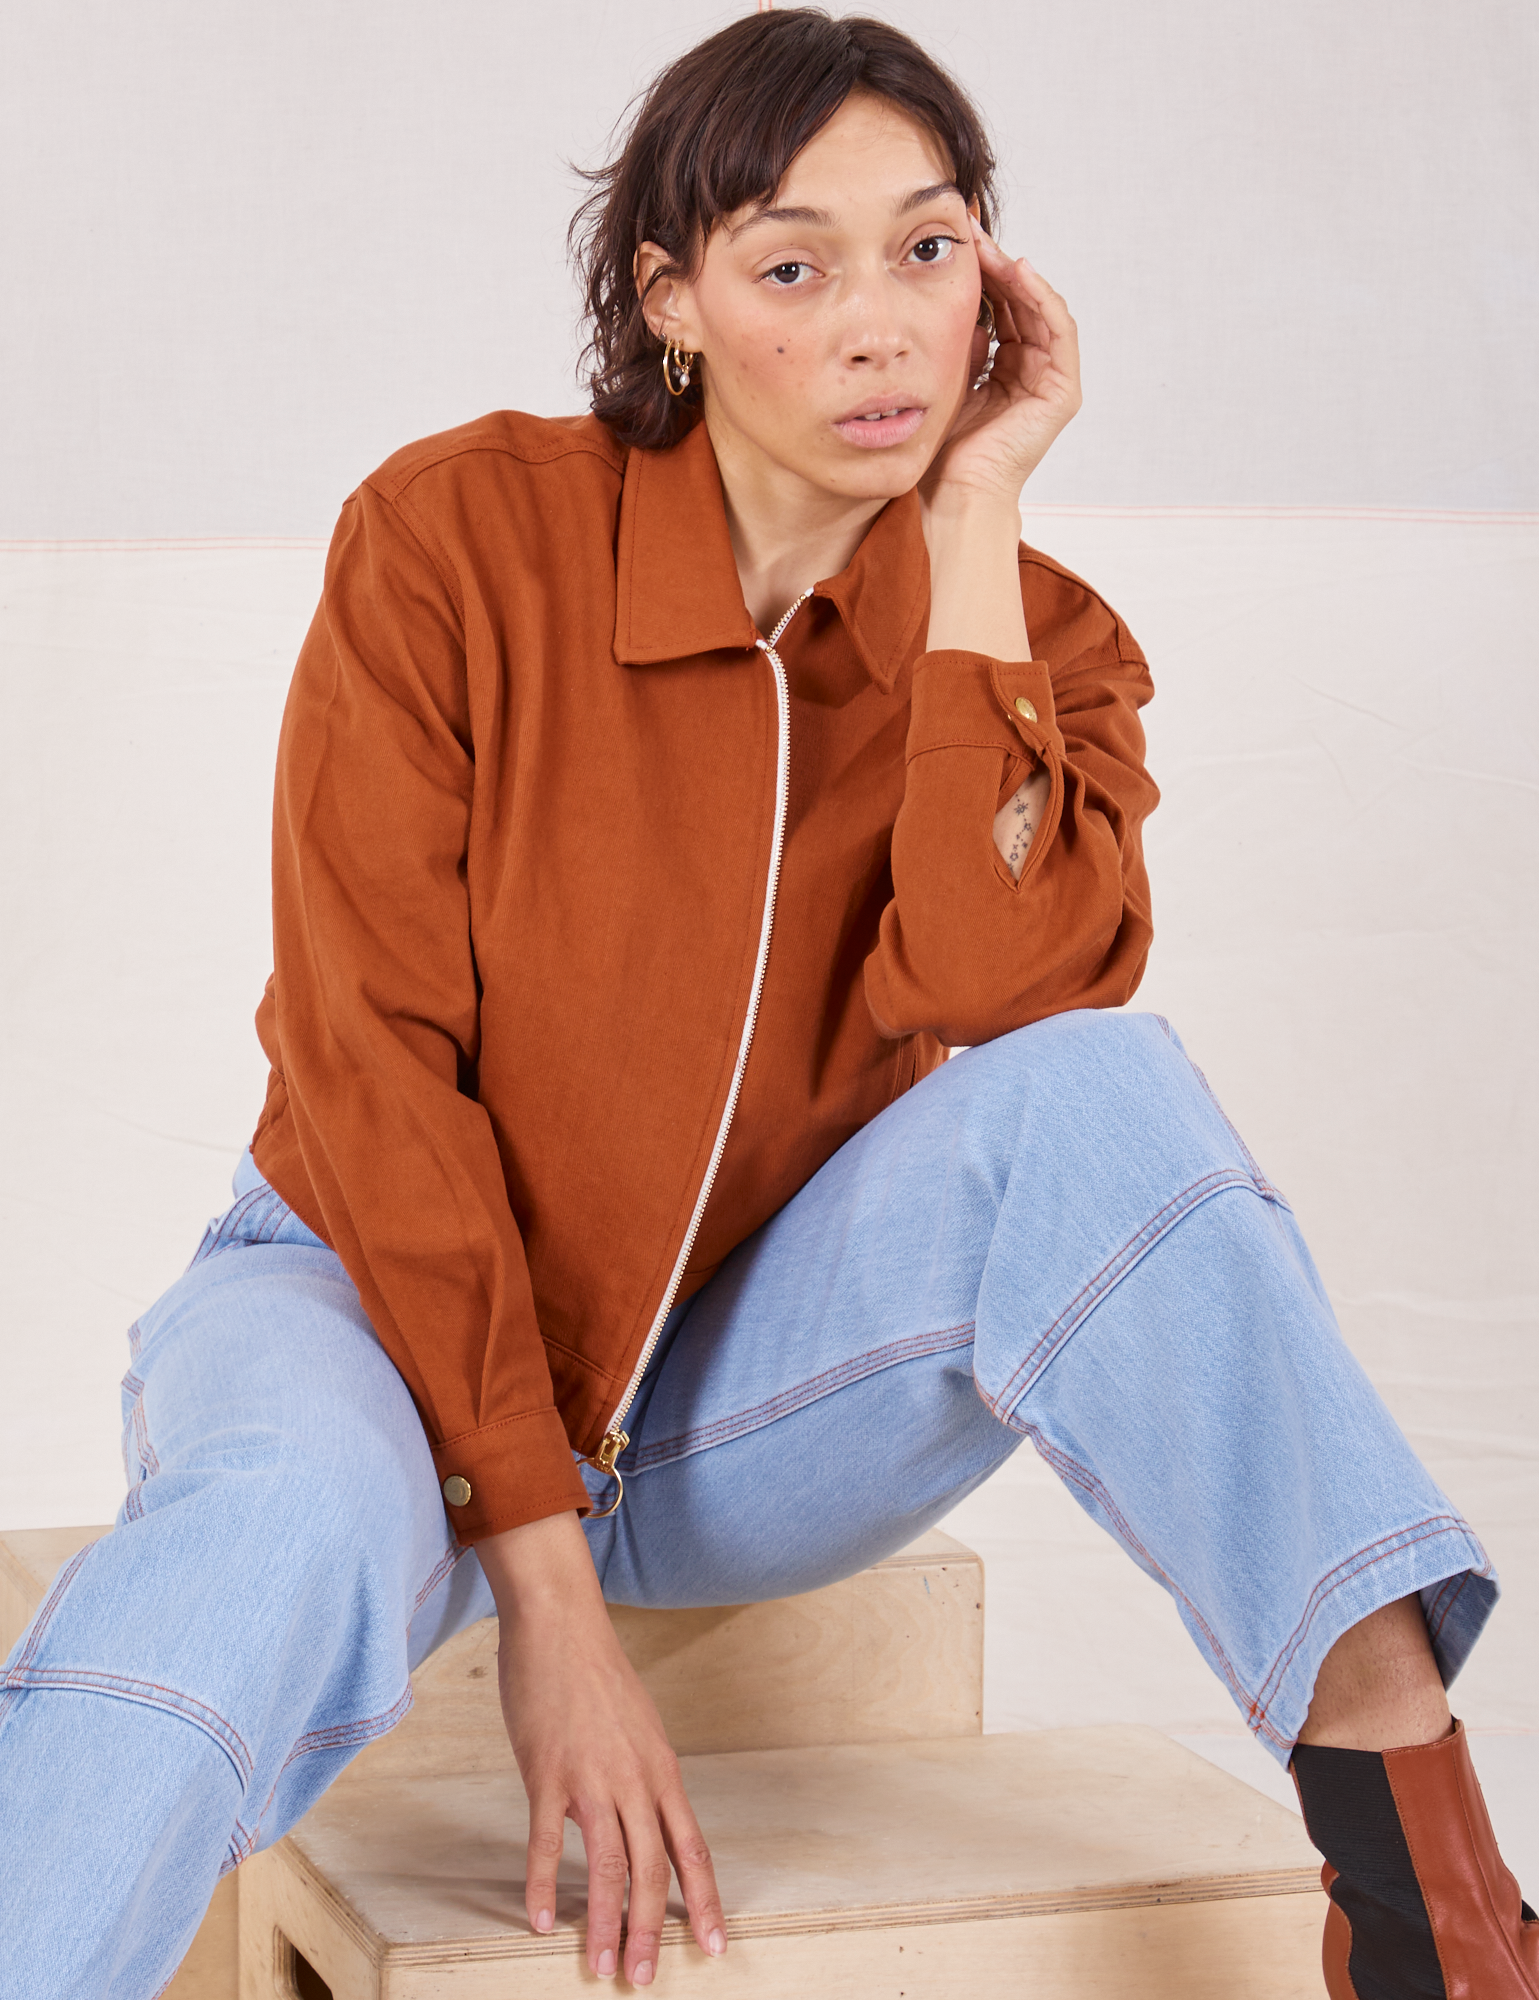 Tiara is wearing Ricky Jacket in Burnt Terracotta and light wash Carpenter Jeans